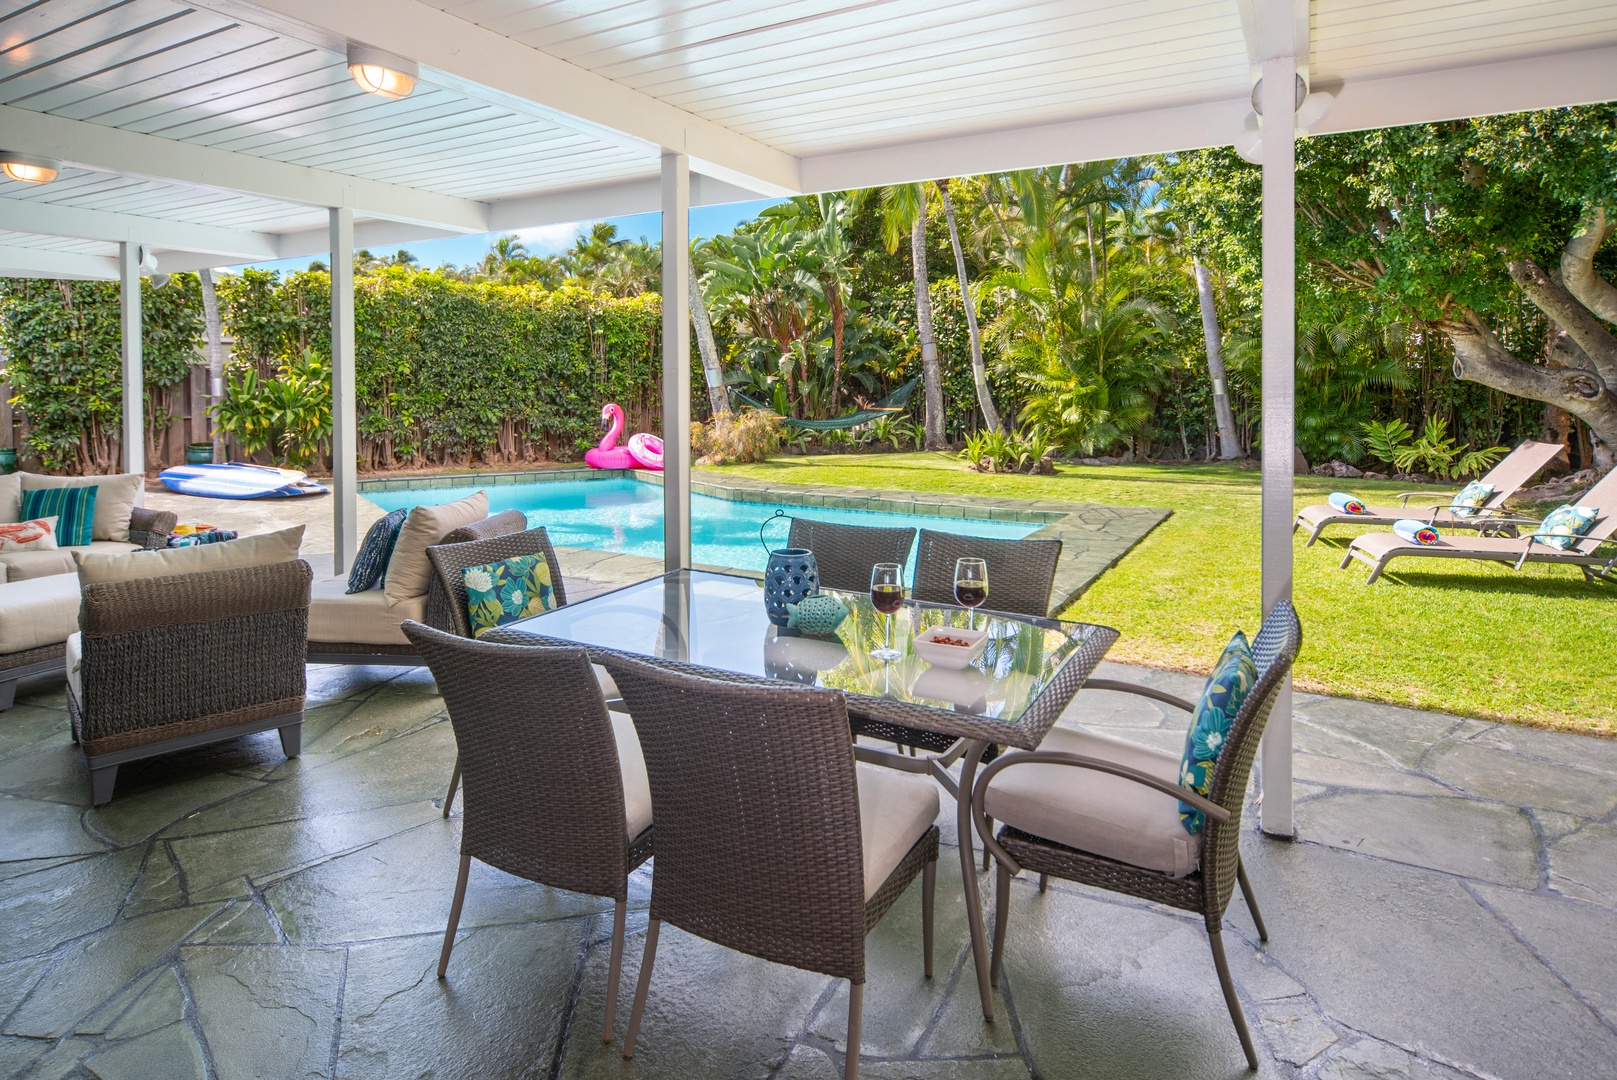 Honolulu Vacation Rentals, Hale Niuiki - From the dining room, behold a backyard oasis filled with plush seating. For peace of mind, a child safety fence is available.